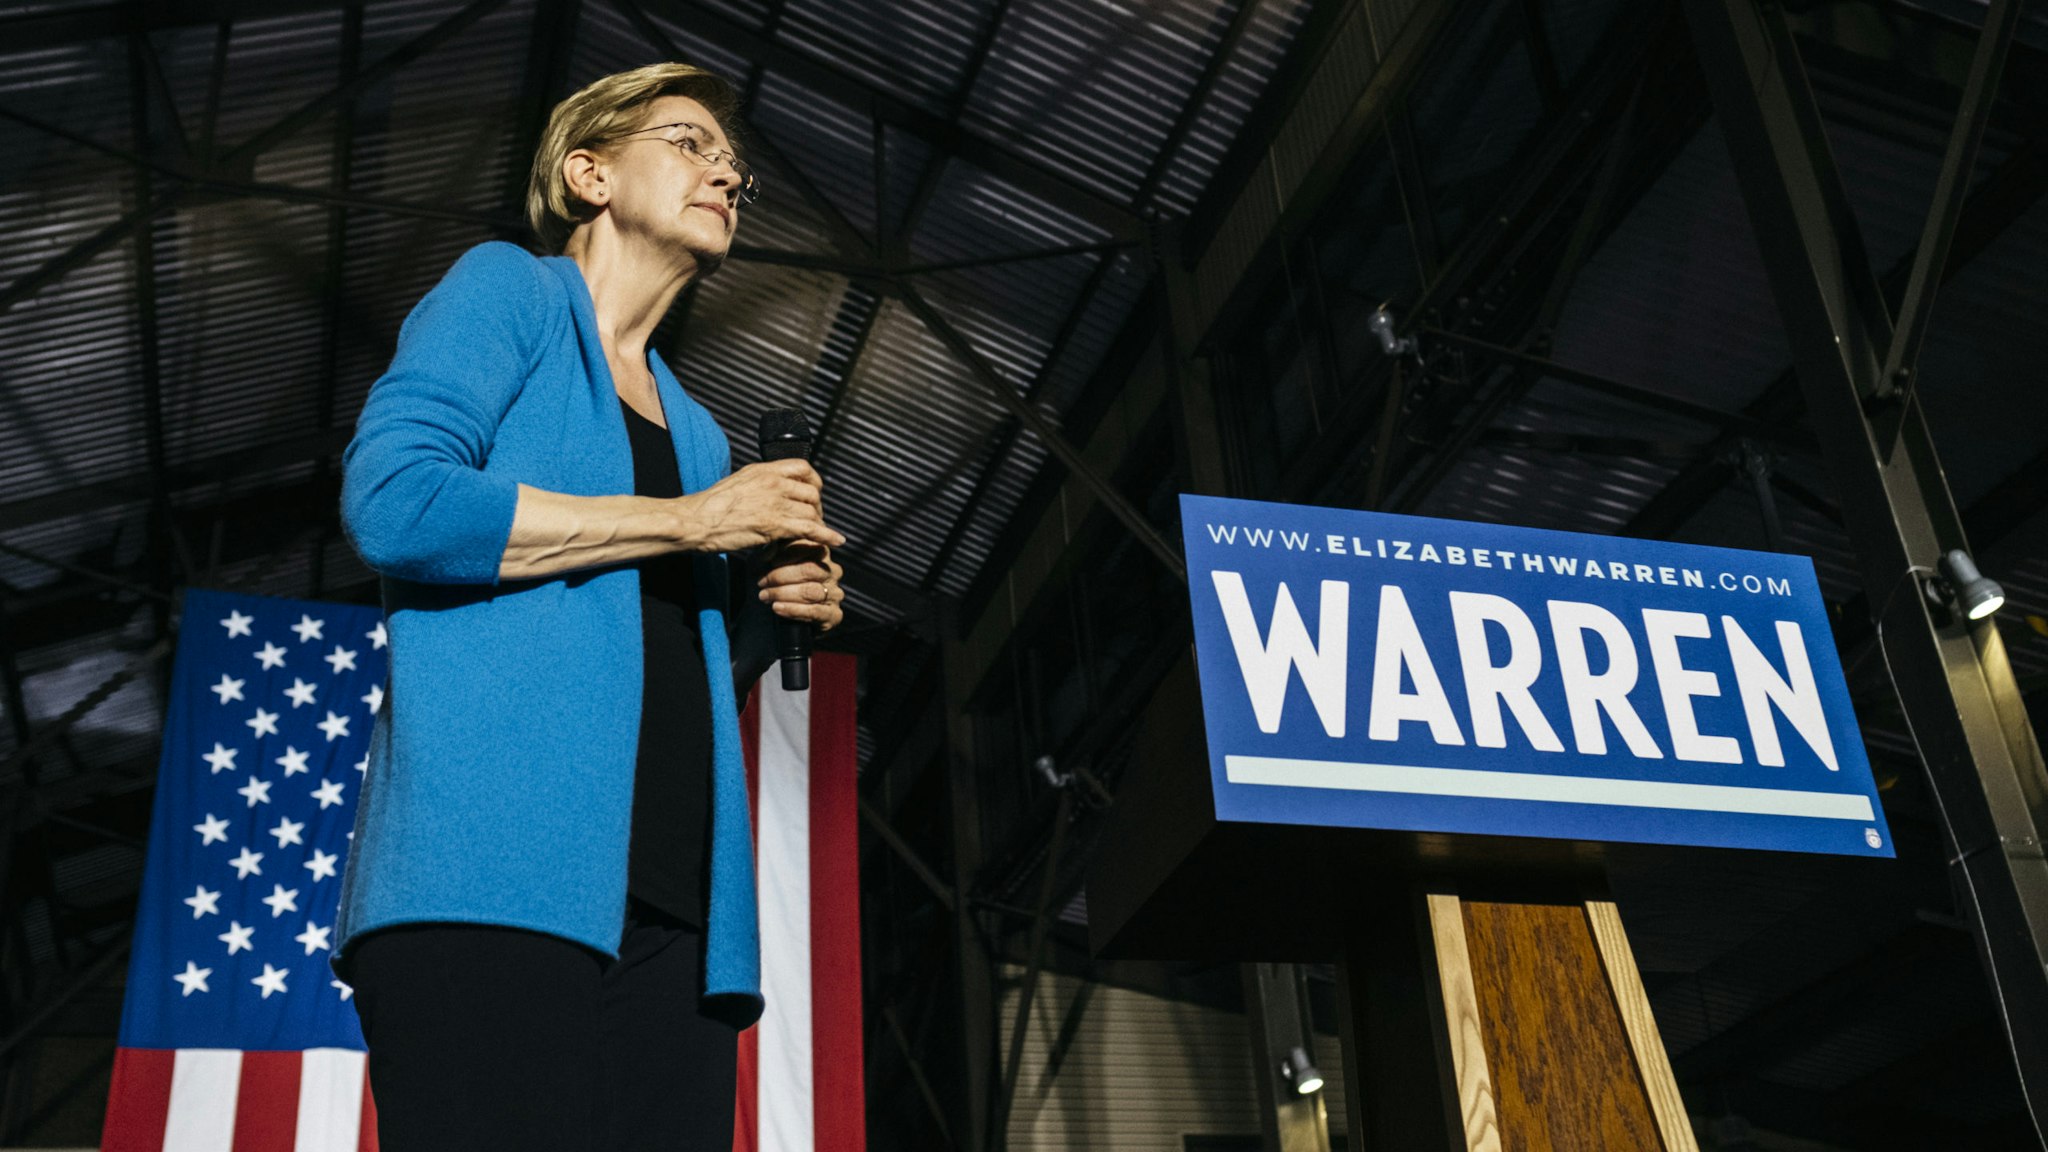 enator Elizabeth Warren, a Democrat from Massachusetts and 2020 presidential candidate, pauses while speaking during a rally in Detroit, Michigan, U.S., on Tuesday, March 3, 2020. The biggest day of the presidential primary calendar will define the nomination fight for Bernie Sanders and Joe Biden and determine whether Michael Bloomberg and Warren have a rationale for carrying on their campaigns. Photographer: Erin Kirkland/Bloomberg via Get